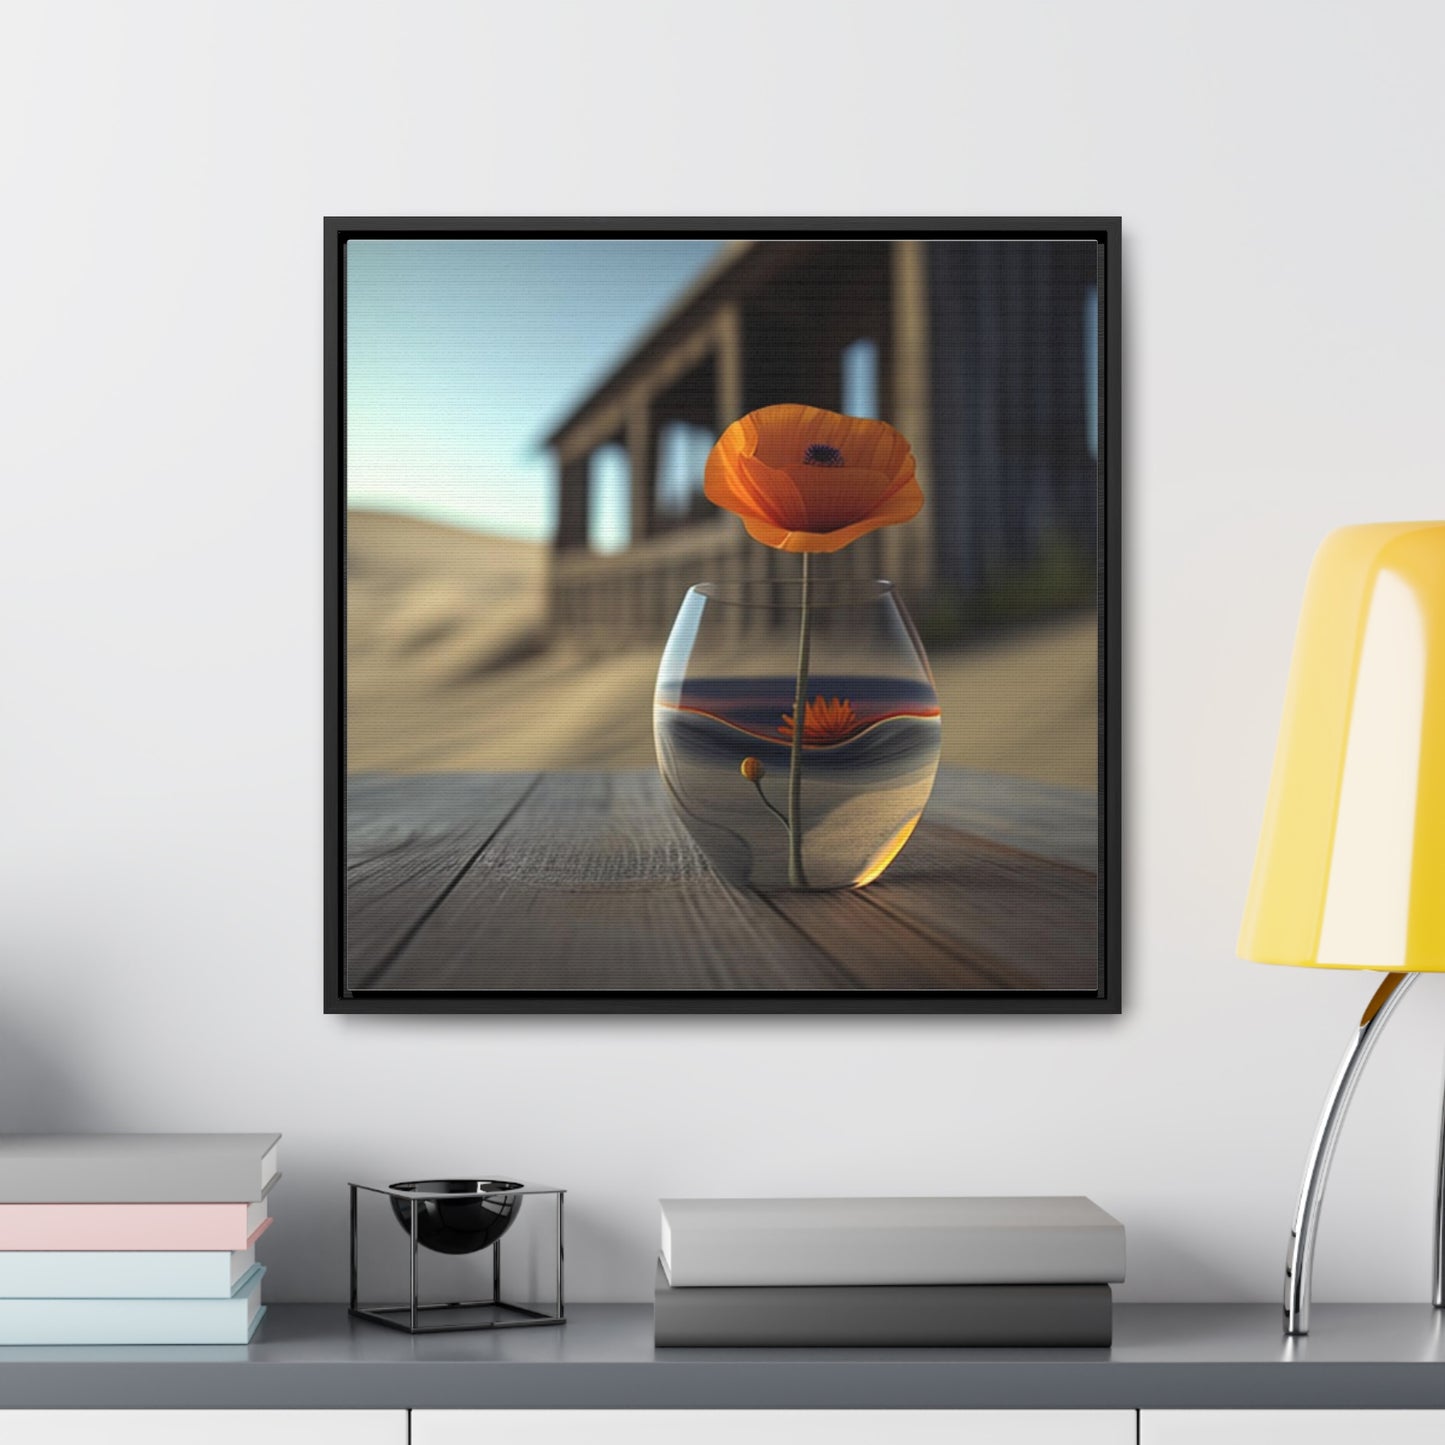 Gallery Canvas Wraps, Square Frame Poppy in a Glass Vase 4